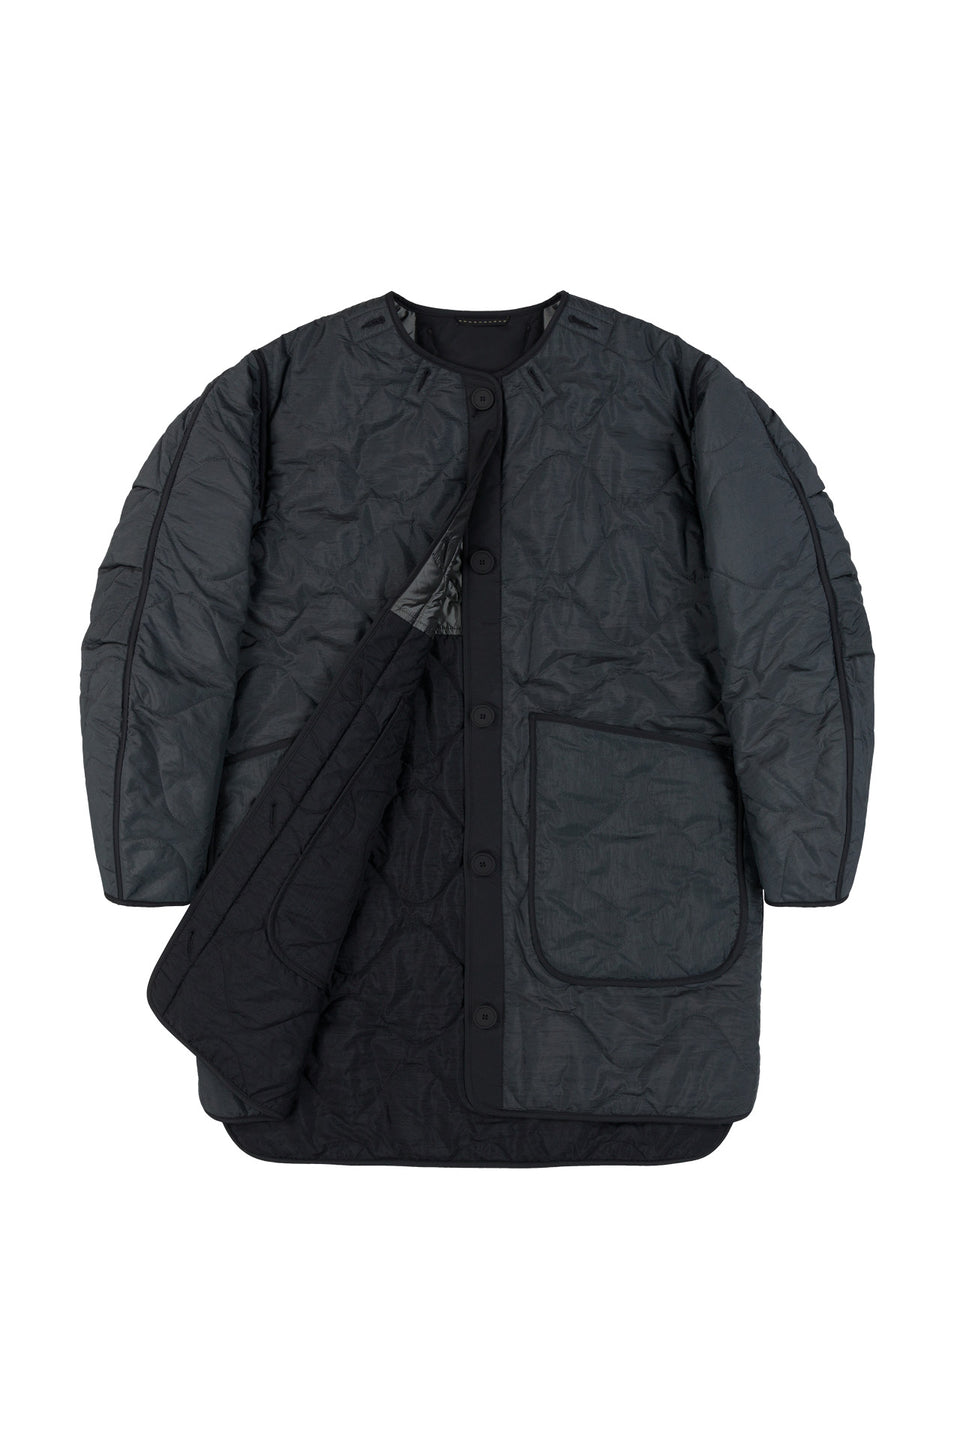 Colourblock Quilt Jacket - Anthracite / Slate (listing page thumbnail)